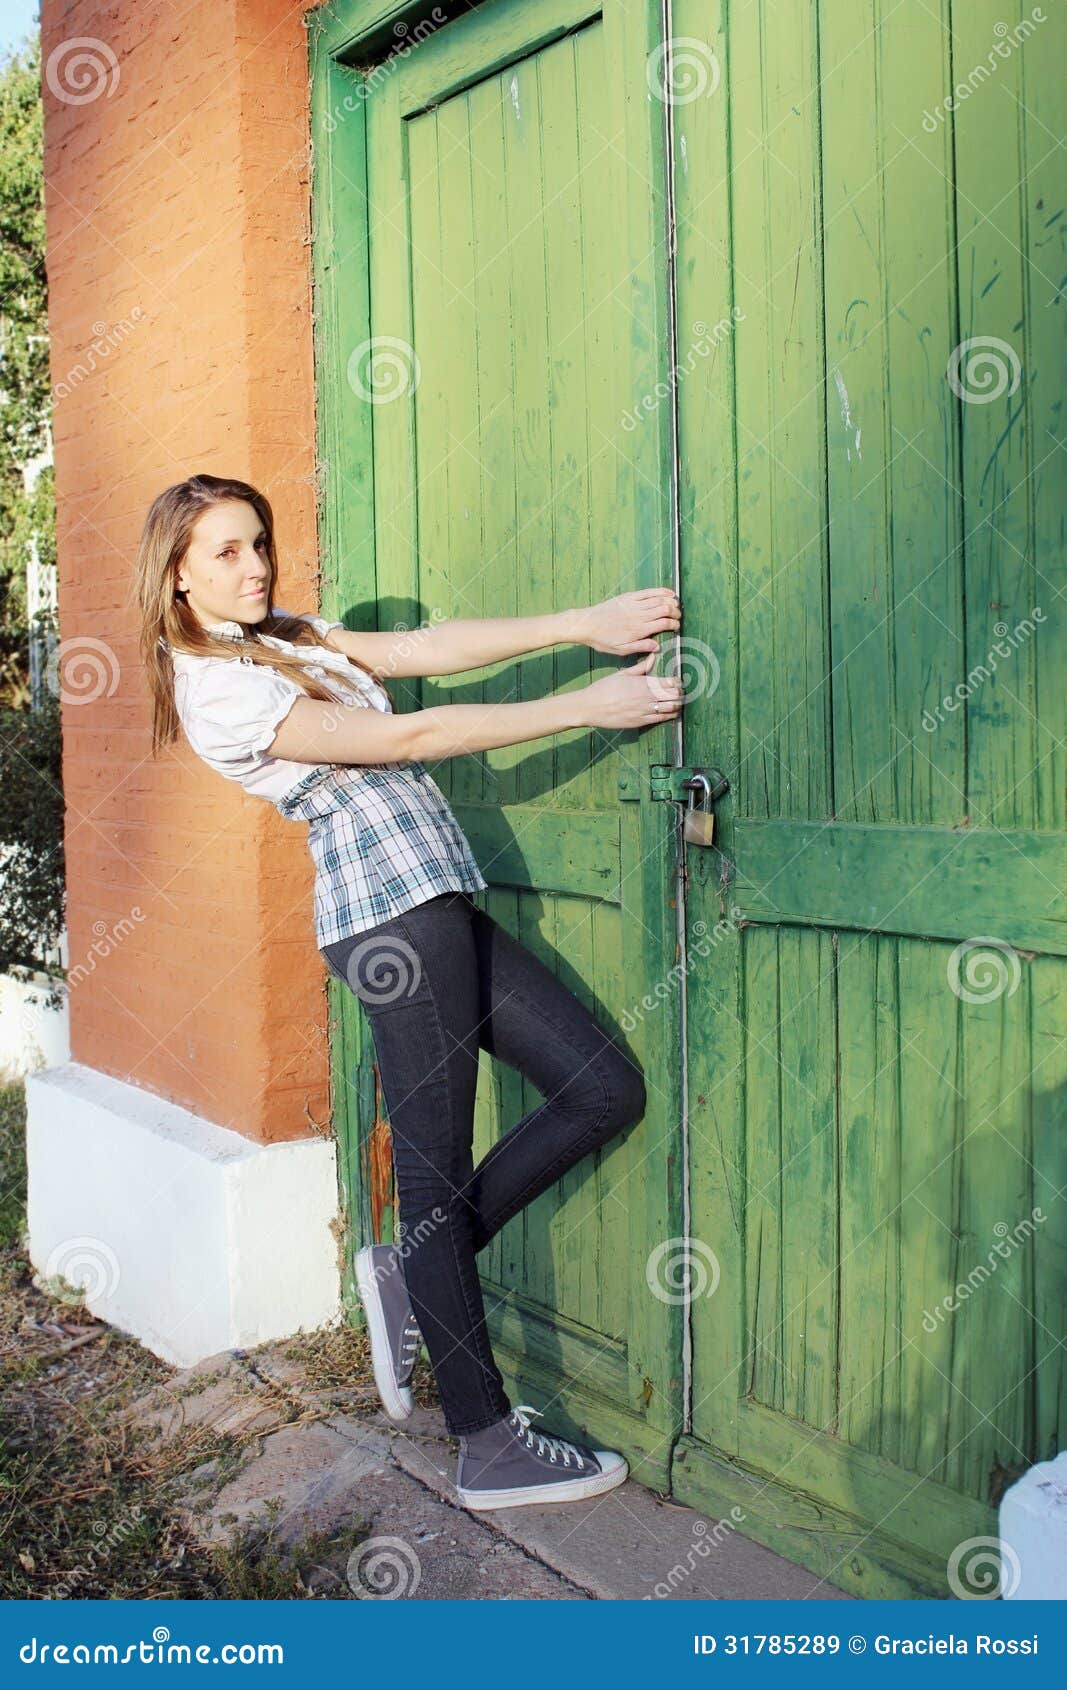 Open The Door Green Royalty Free Stock Images - Image: 31785289